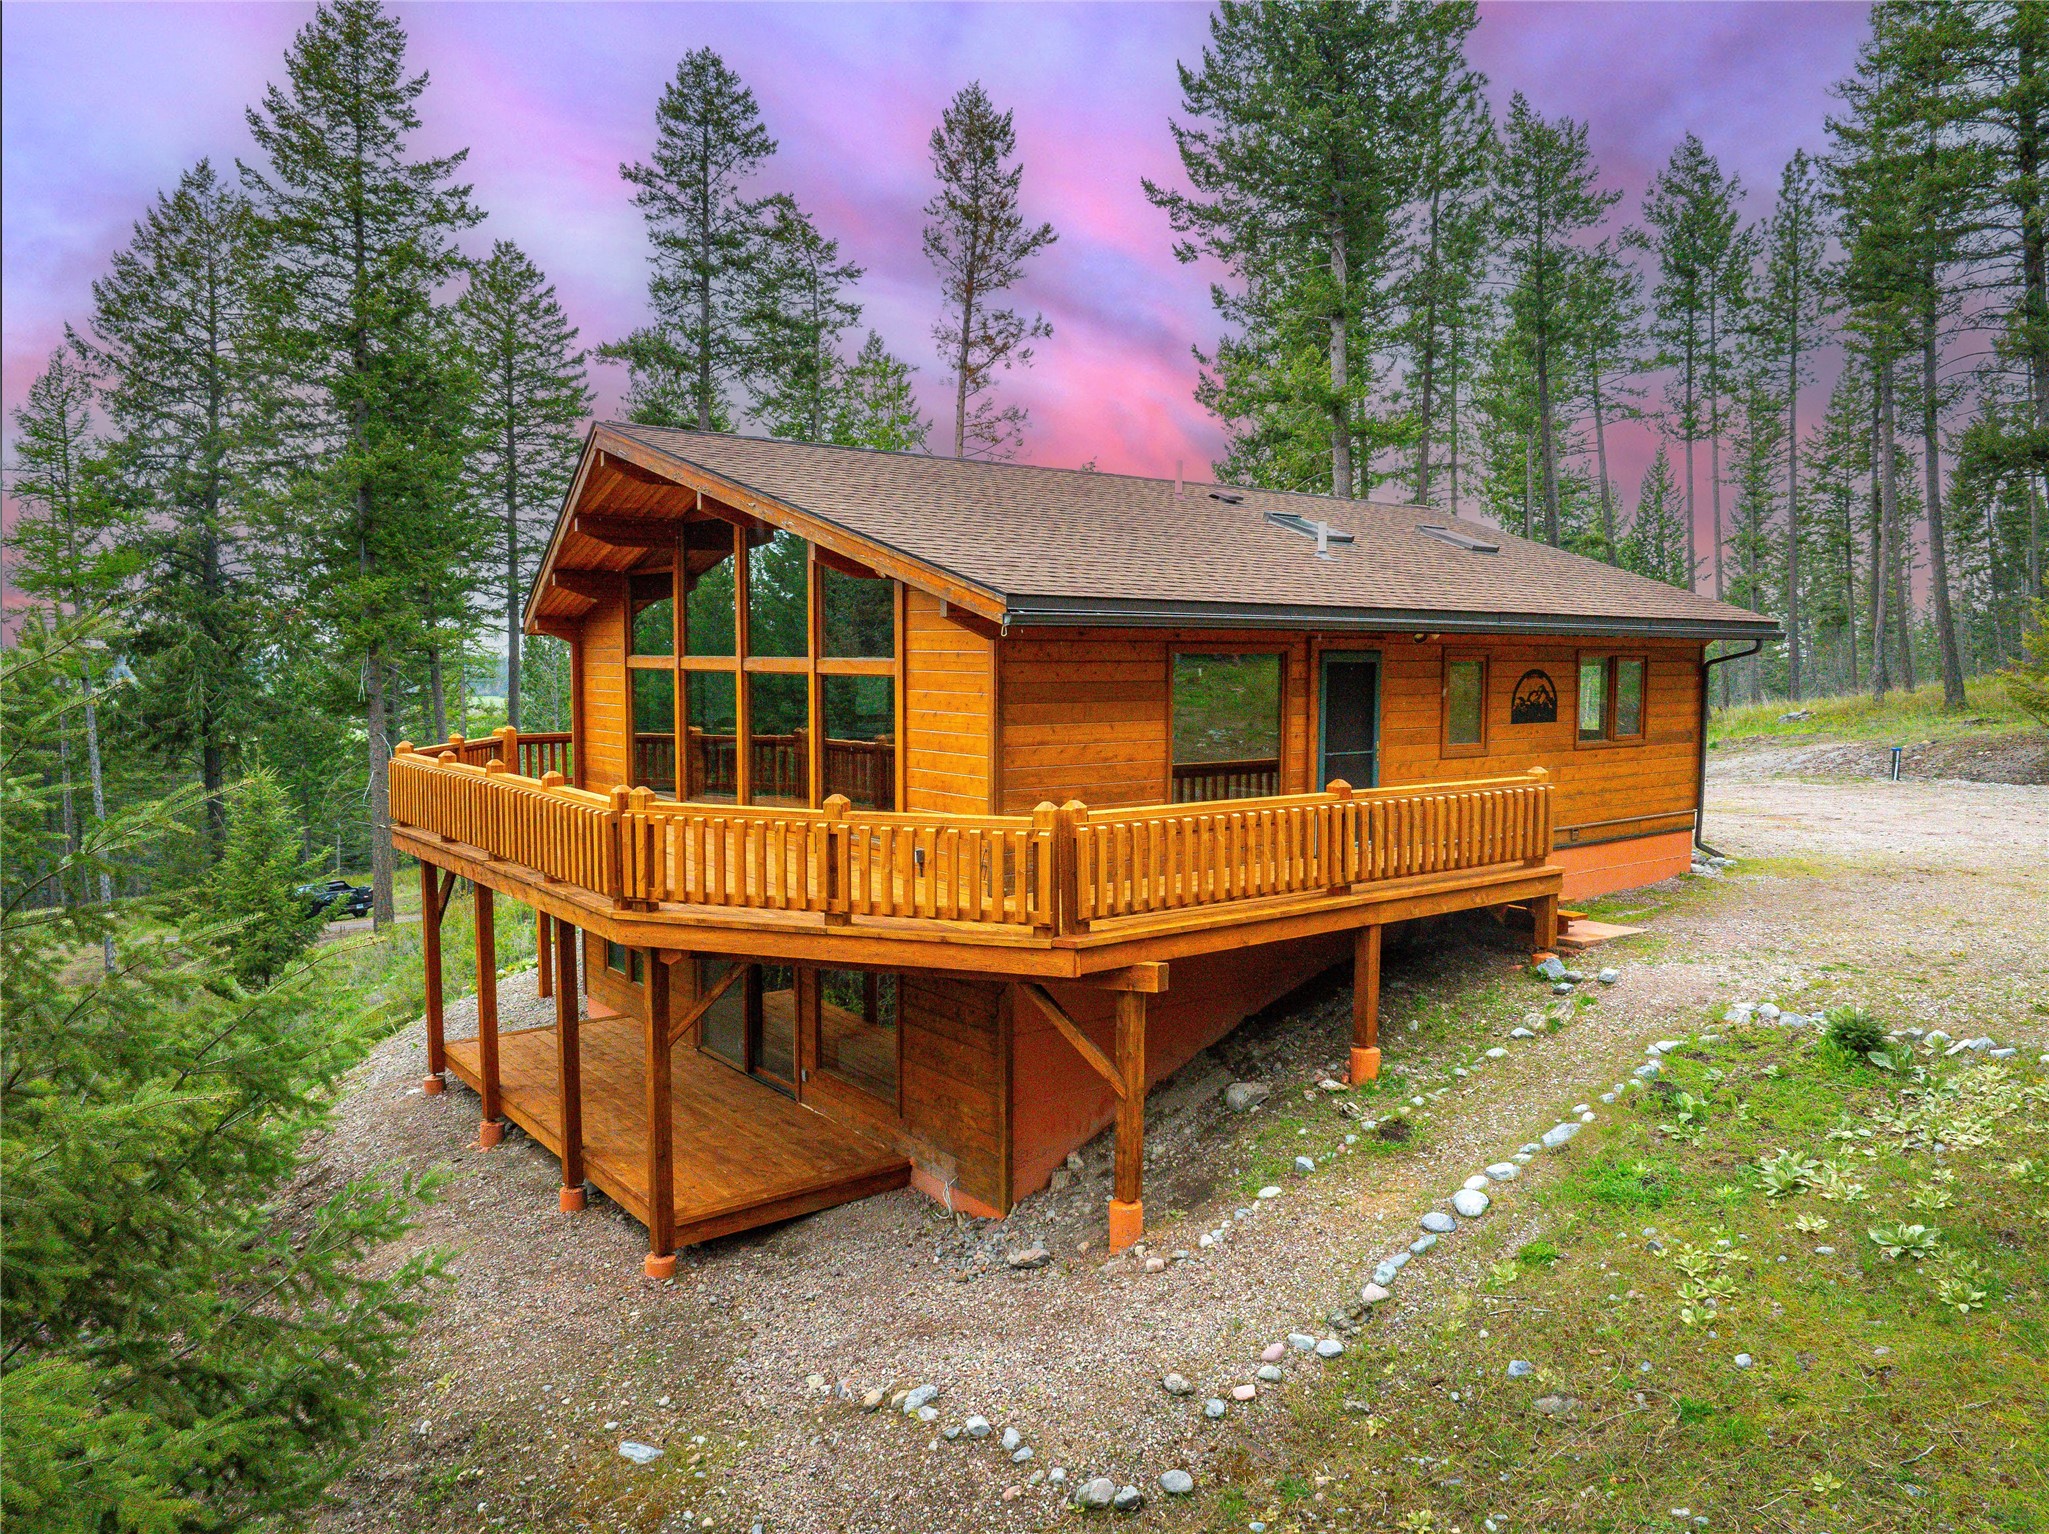 Imagine starting your day sitting in the morning sun on your private deck with a hot cup of coffee. Gazing up through the trees at the Mission Mountains, serenaded by the sounds of the forest & nearby cascading mountain stream. It just doesn't get much better! This Lindal Cedar Home sits on almost 11 acres that, while only 20 min to Polson, feels remote as it borders Tribal forest. The open floor plan, complete with wood covered cathedral ceilings & floor-to-ceiling windows, allows the Living/Dining/Kitchen areas to blend and create an elusive spacious, cozy feeling that whispers "Home" that many larger houses lack. 2 floors w/3 bedrooms (Master ensuite & large walk-in closet) & 2 additional baths, an abundance of storage, daylight basement rec/TV room w/small deck, laundry room, & an insulated double-car garage. The property has been "parked out" with wild flowers making it a nature lovers delight. Call Susan Raub-Fortner (406)370-2076 or your real estate professional.